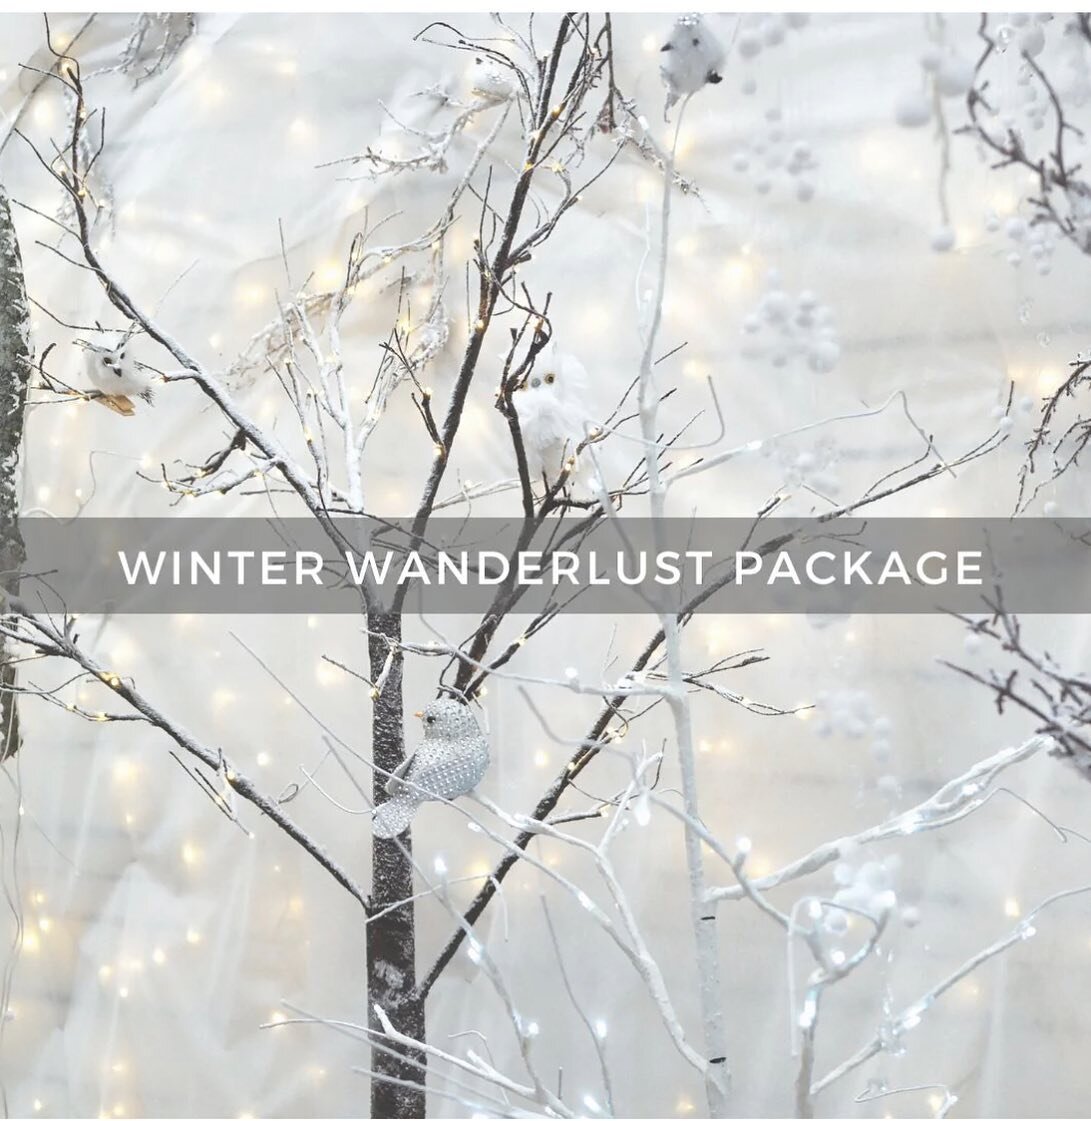 Gift inspo-order online and pickup curbside. 

Experience wanderlust from head to toe with a stimulating massage to open the senses and a relaxing pedicure, featuring Red Flower NYC&ndash;certified organic products made with potent fruit, flower, and